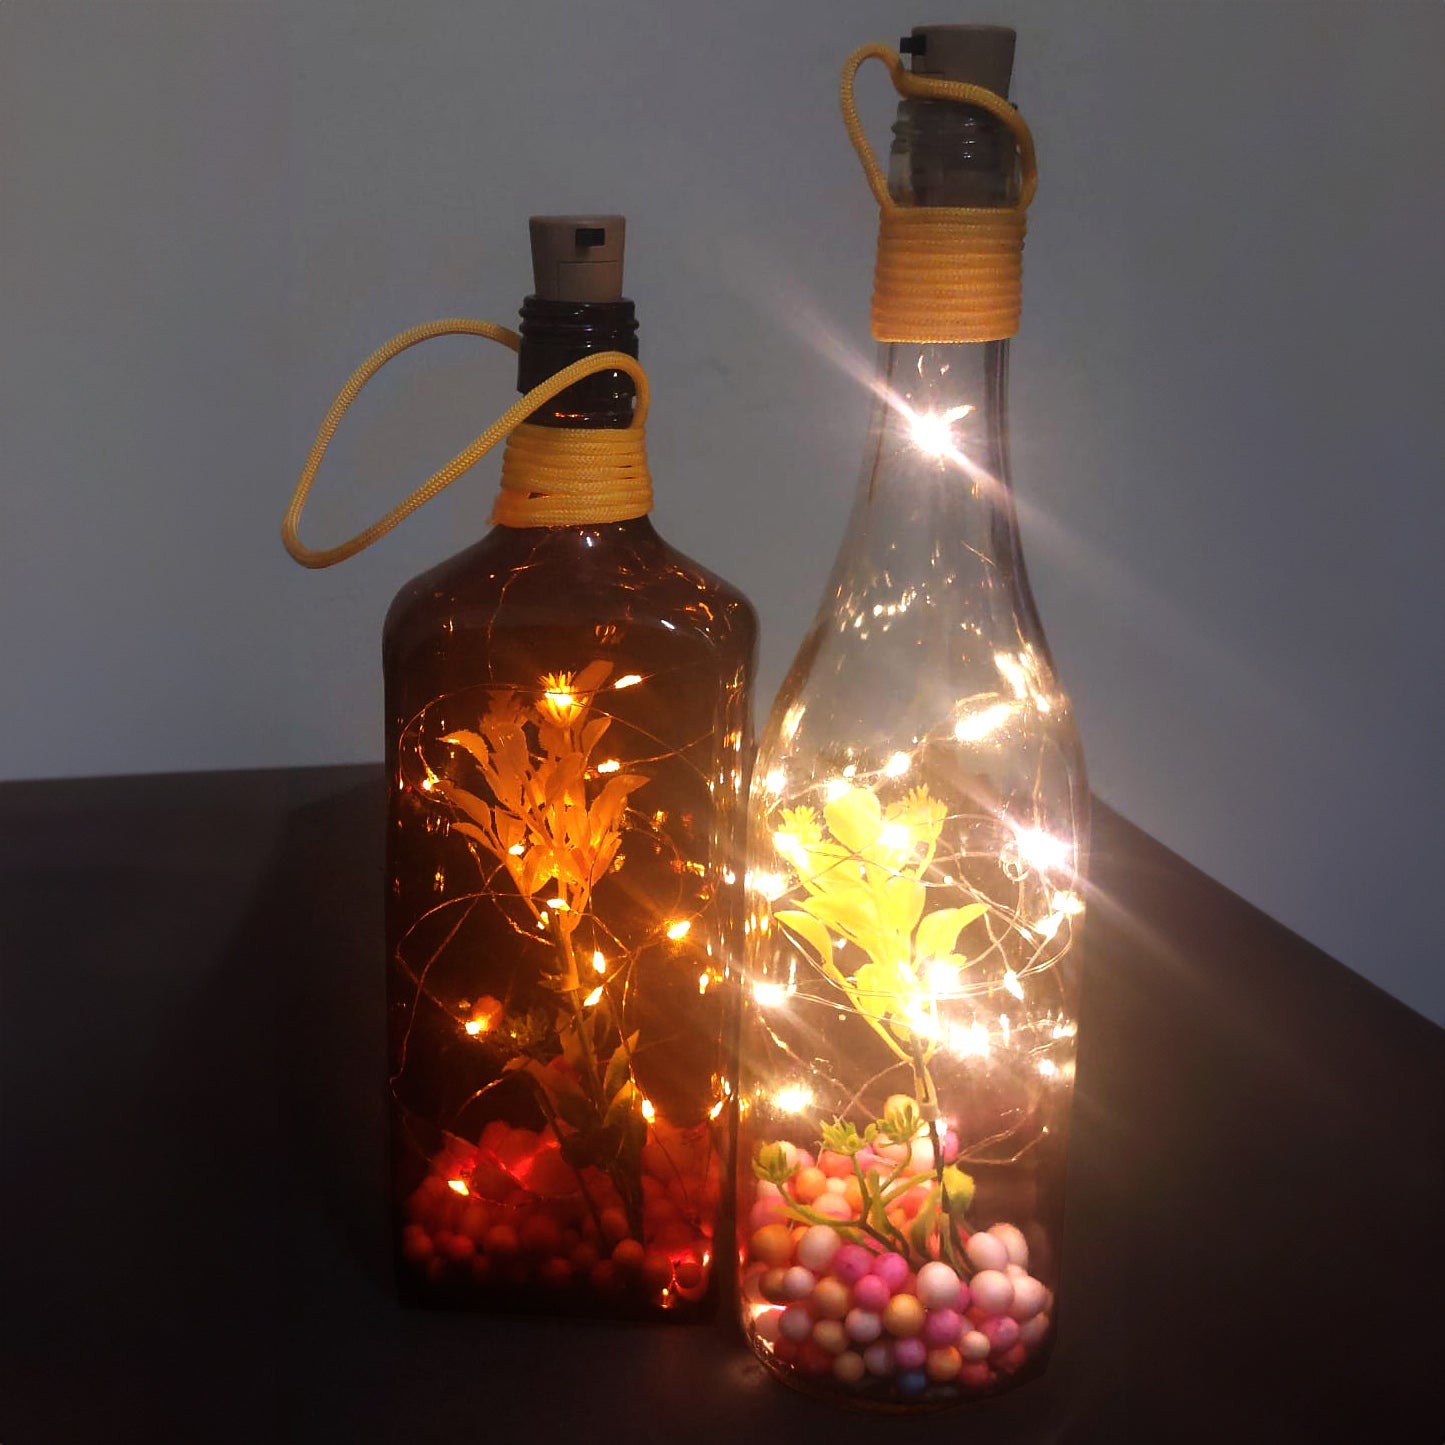 2 Wine Bottle LED Fairy 1.6 Meter Lights with Artificial Cork for Diwali Christmas, Rakhi, Parties, Indoor, Outdoor,Festival Decoration Usage